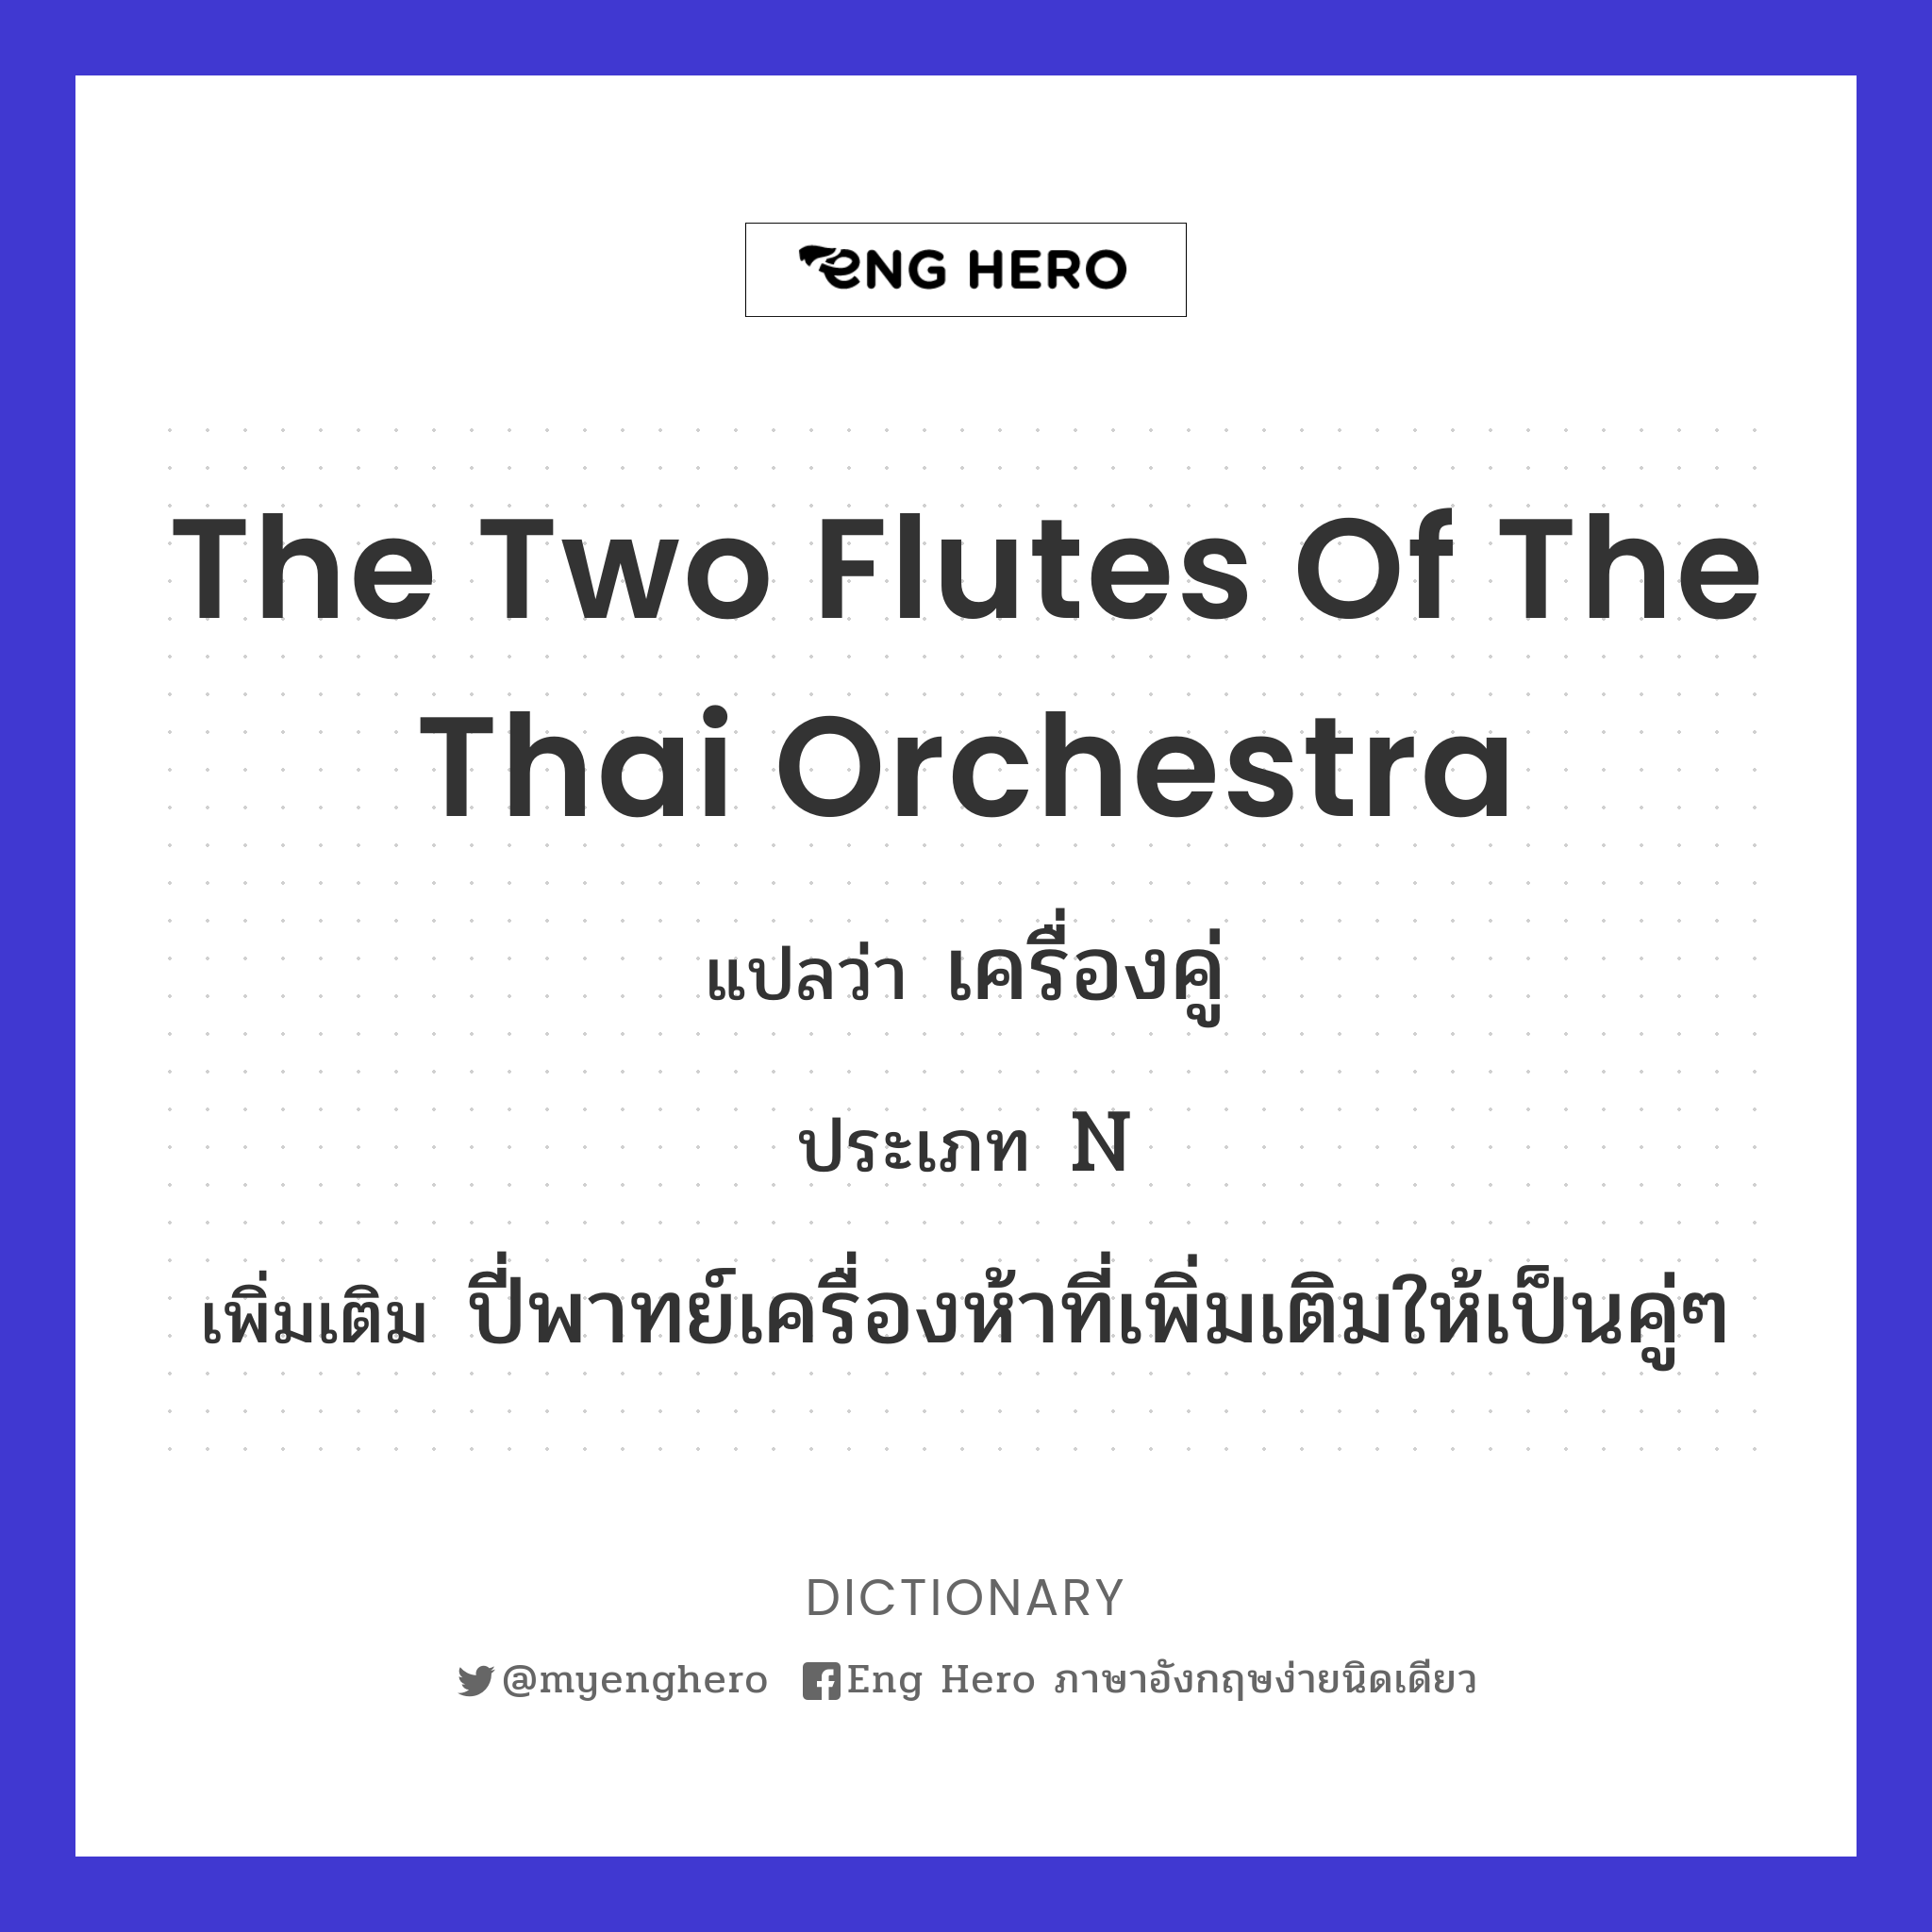 the two flutes of the Thai orchestra